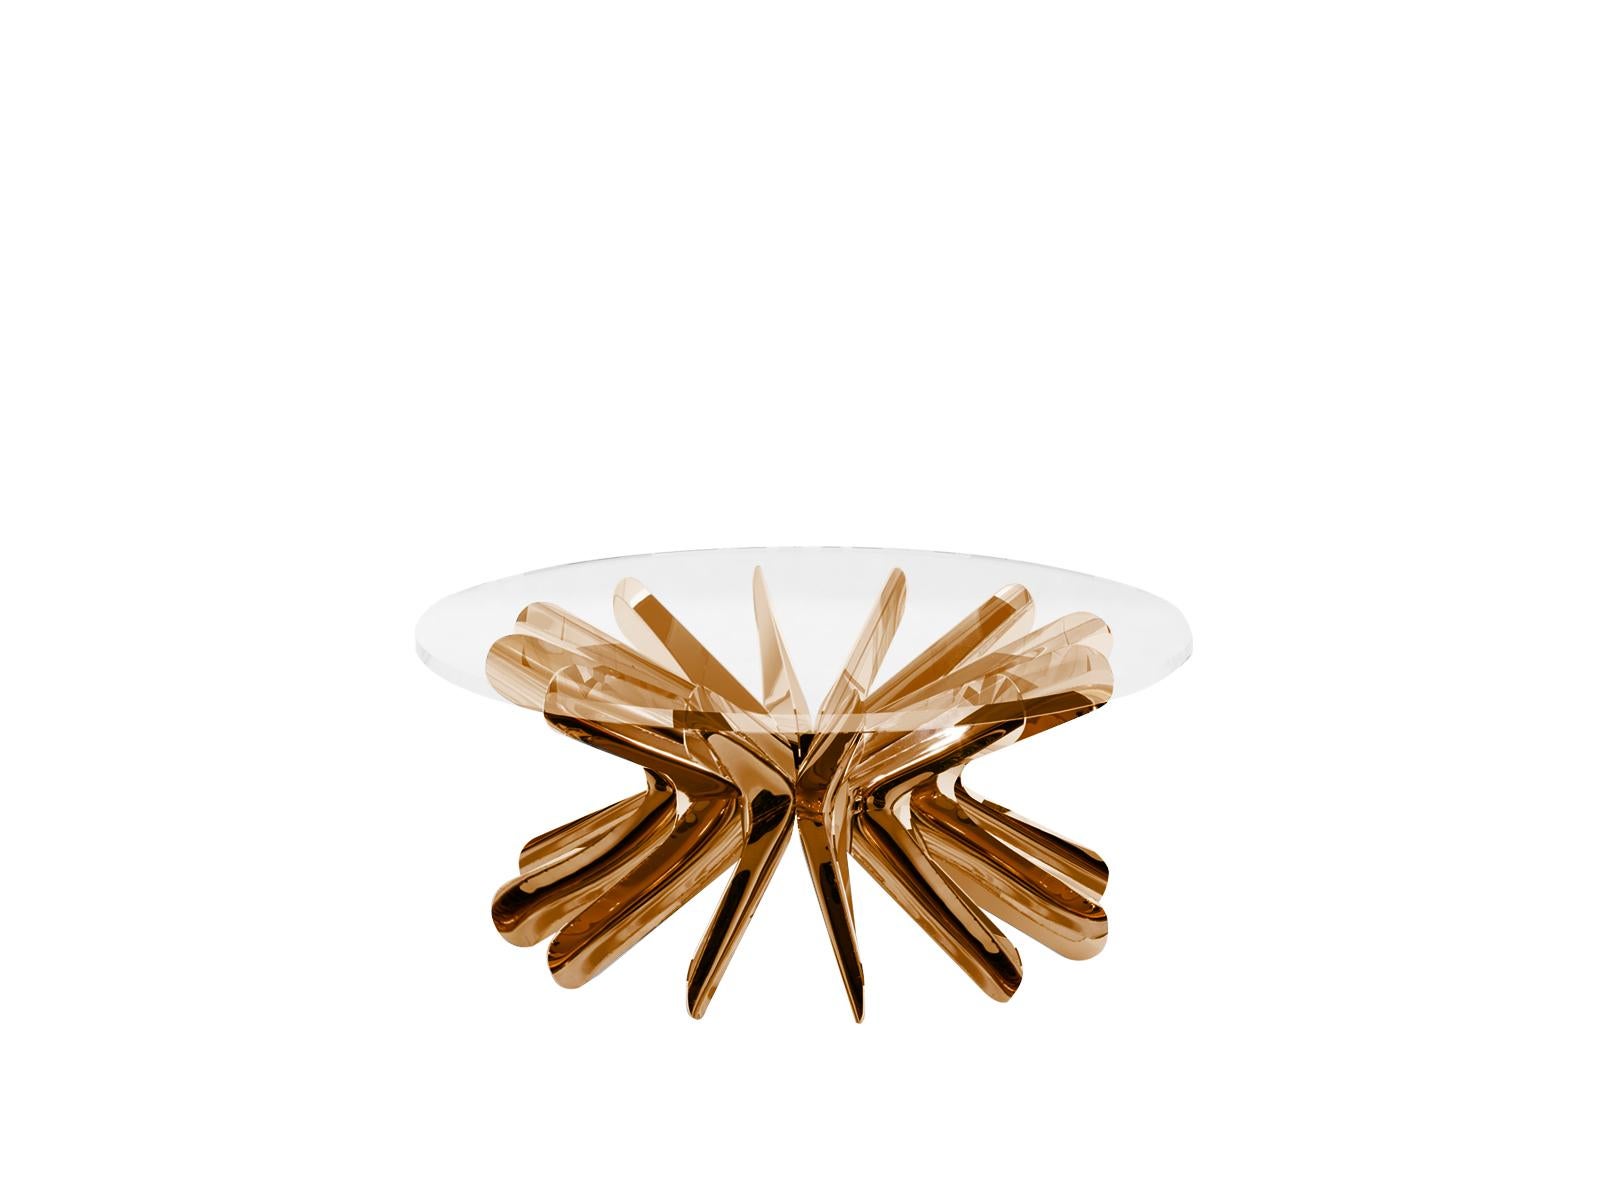 Modern Limited Edition Medium Steel in Rotation Coffee Table in Lacquered Copper, Zieta For Sale